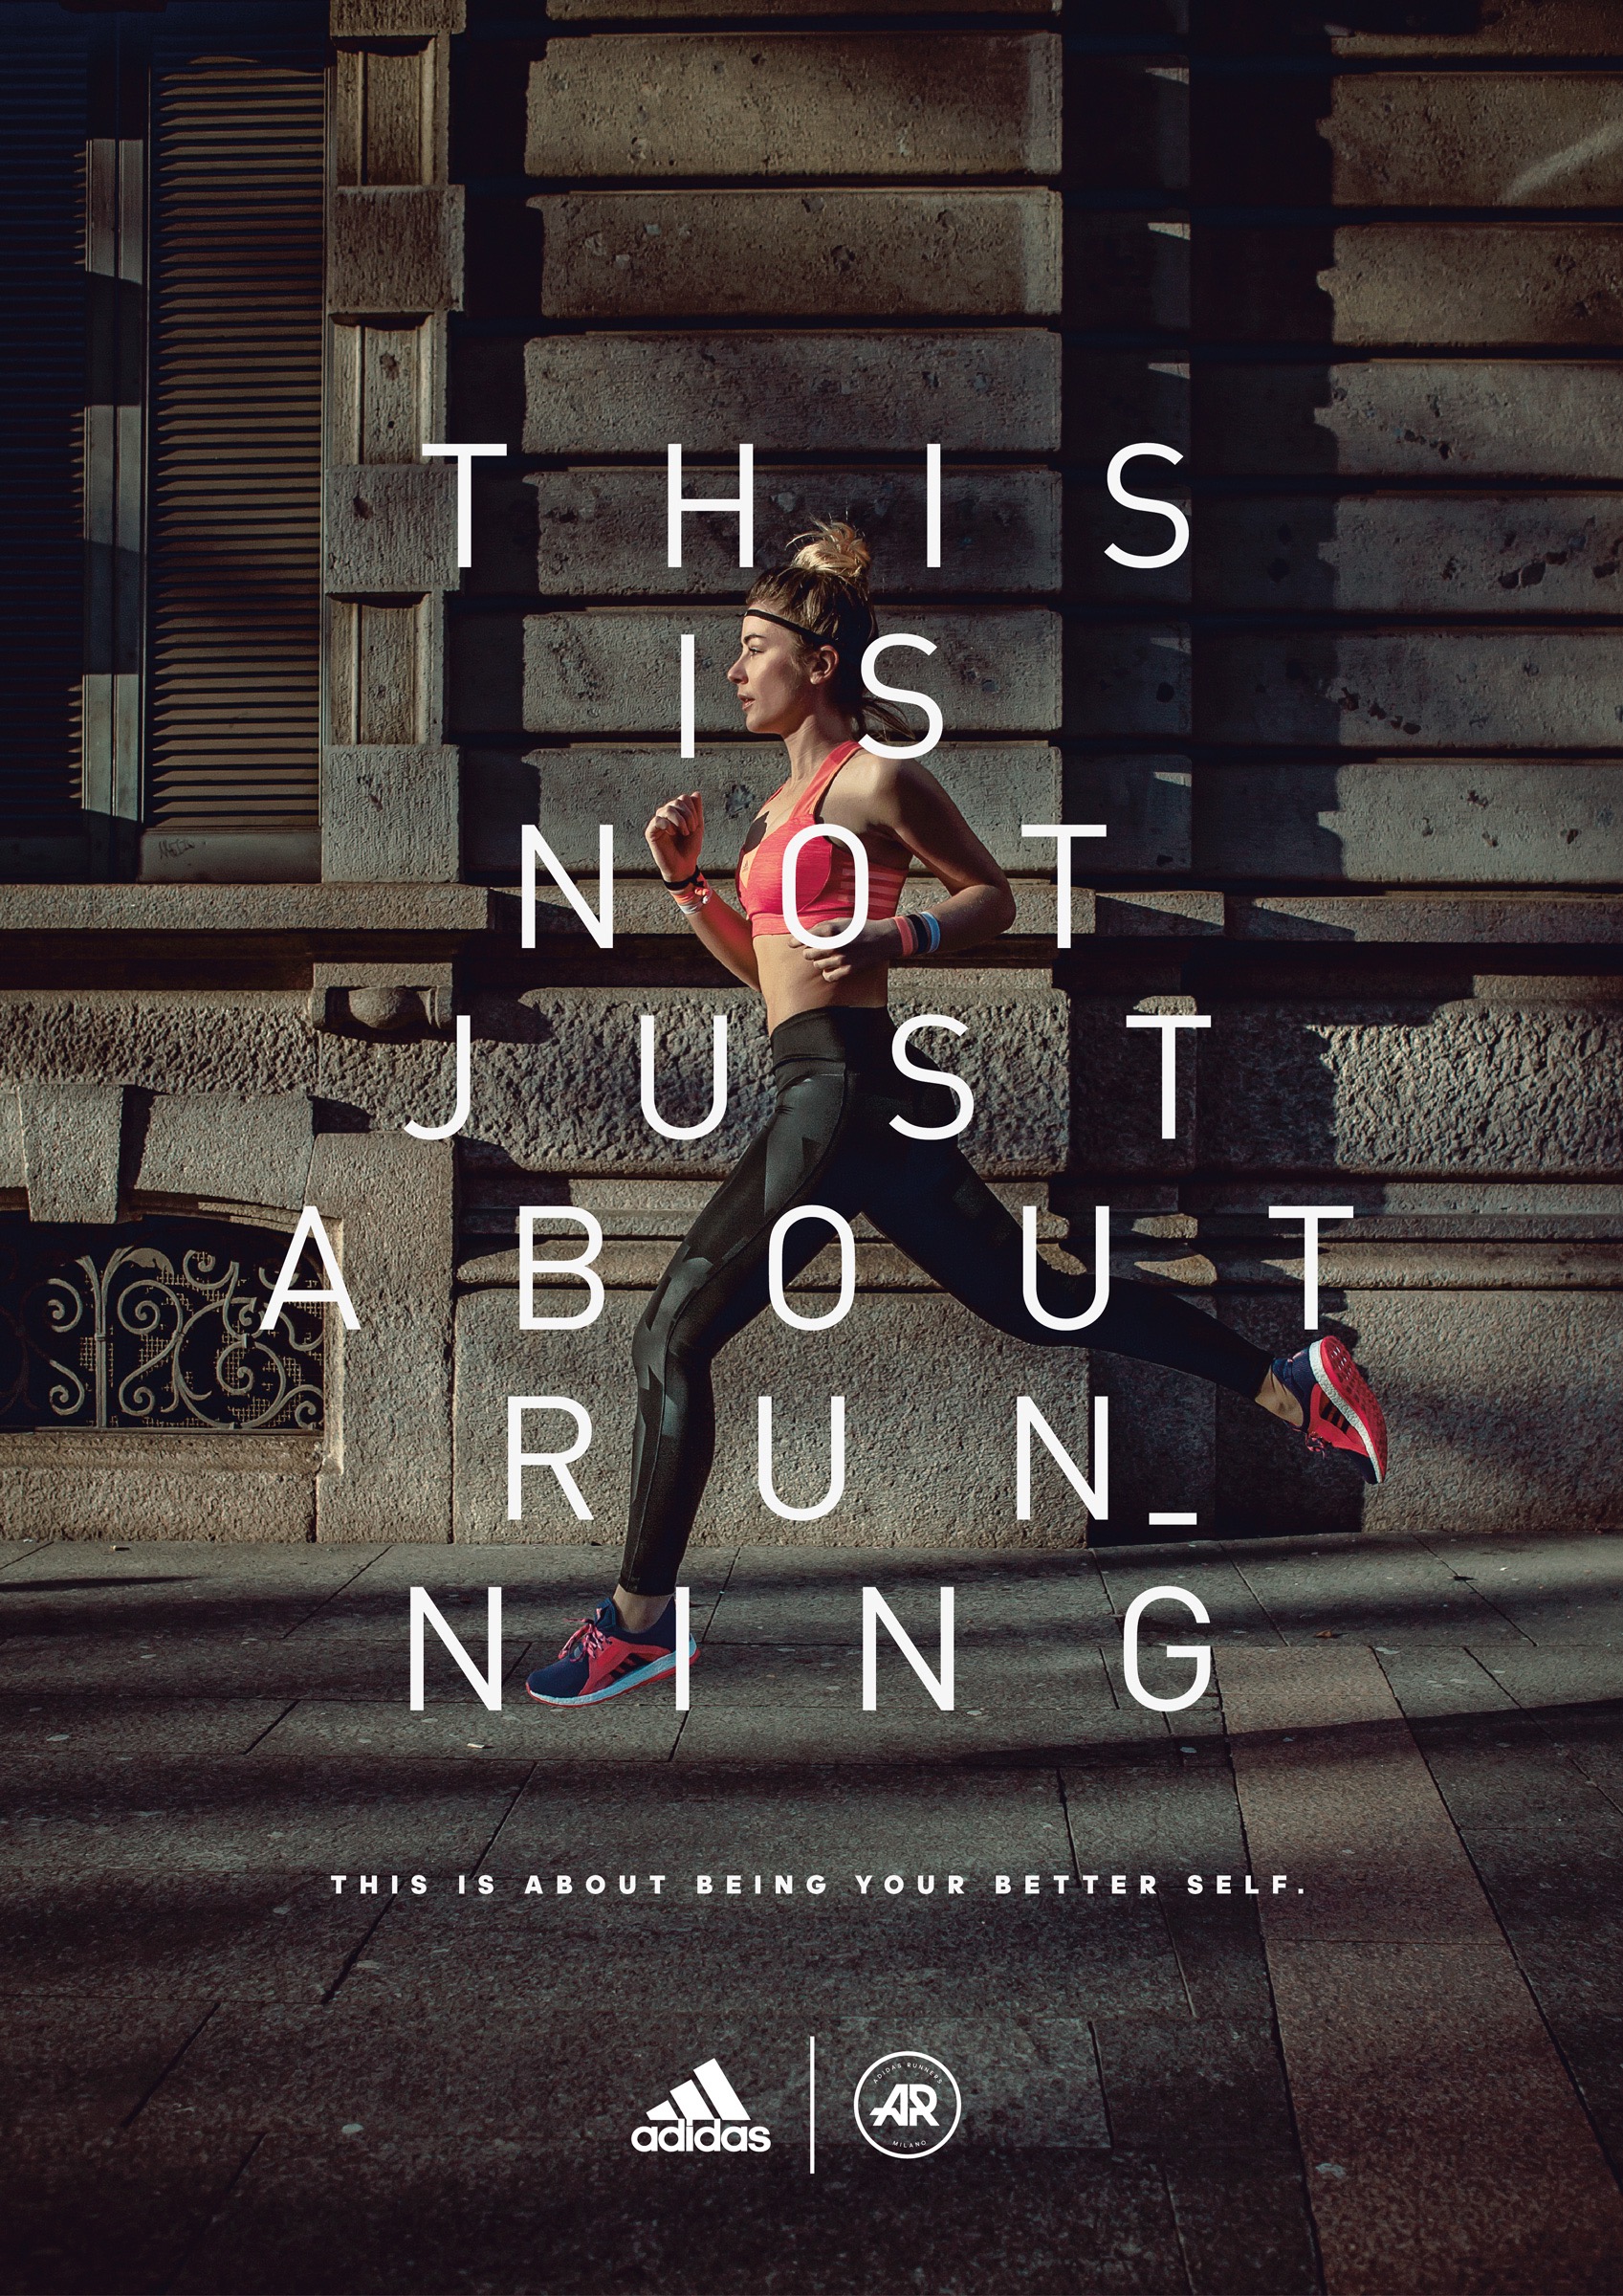 Adidas: Running, Better self, Fun, Pain • Ads of the World™ | Part of The  Clio Network